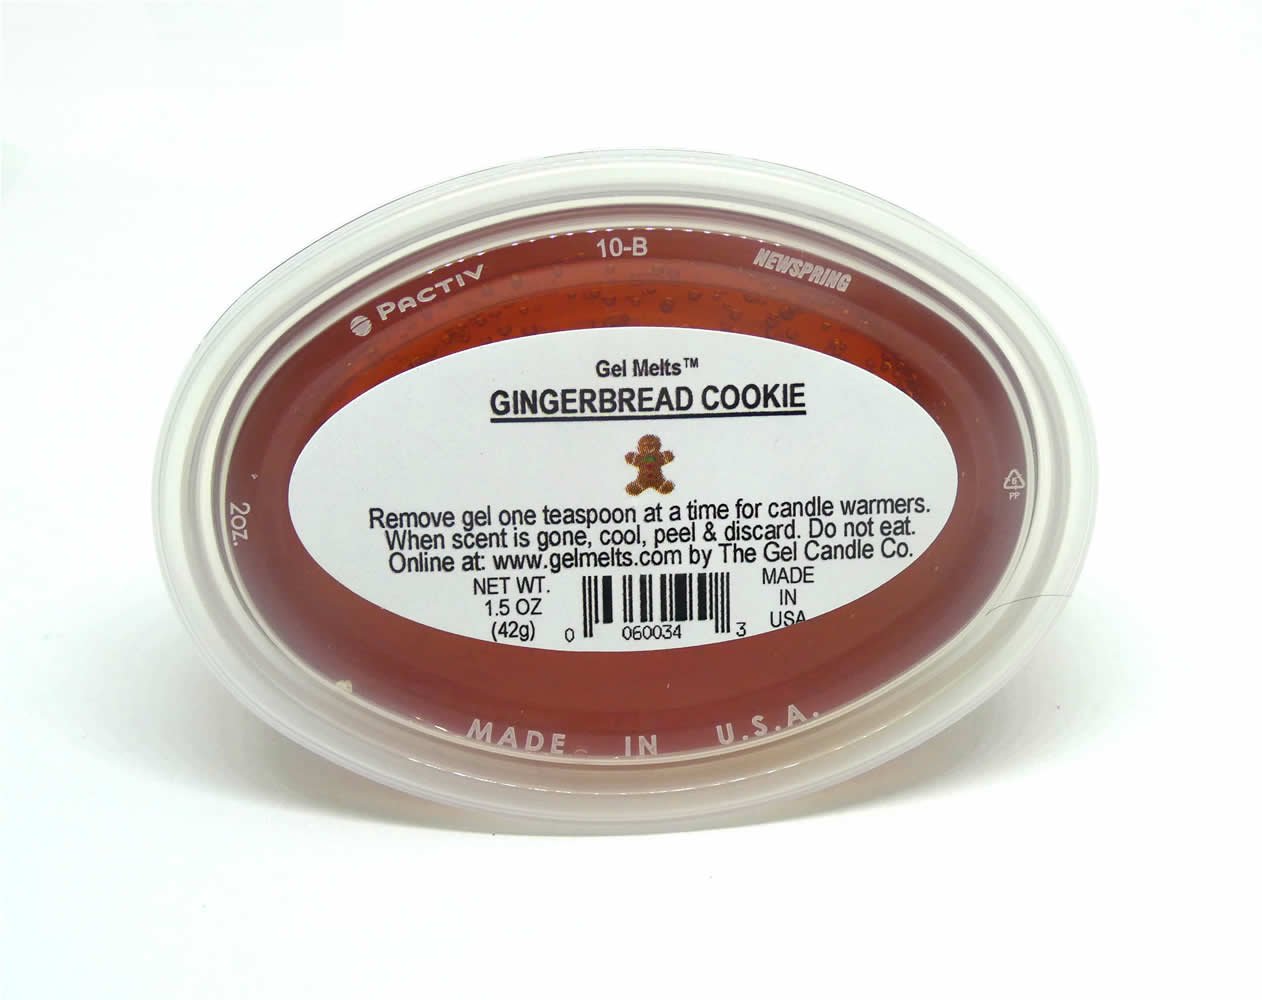 Gingerbread Cookie scented Gel Melts™ for warmers - 3 pack - Click Image to Close